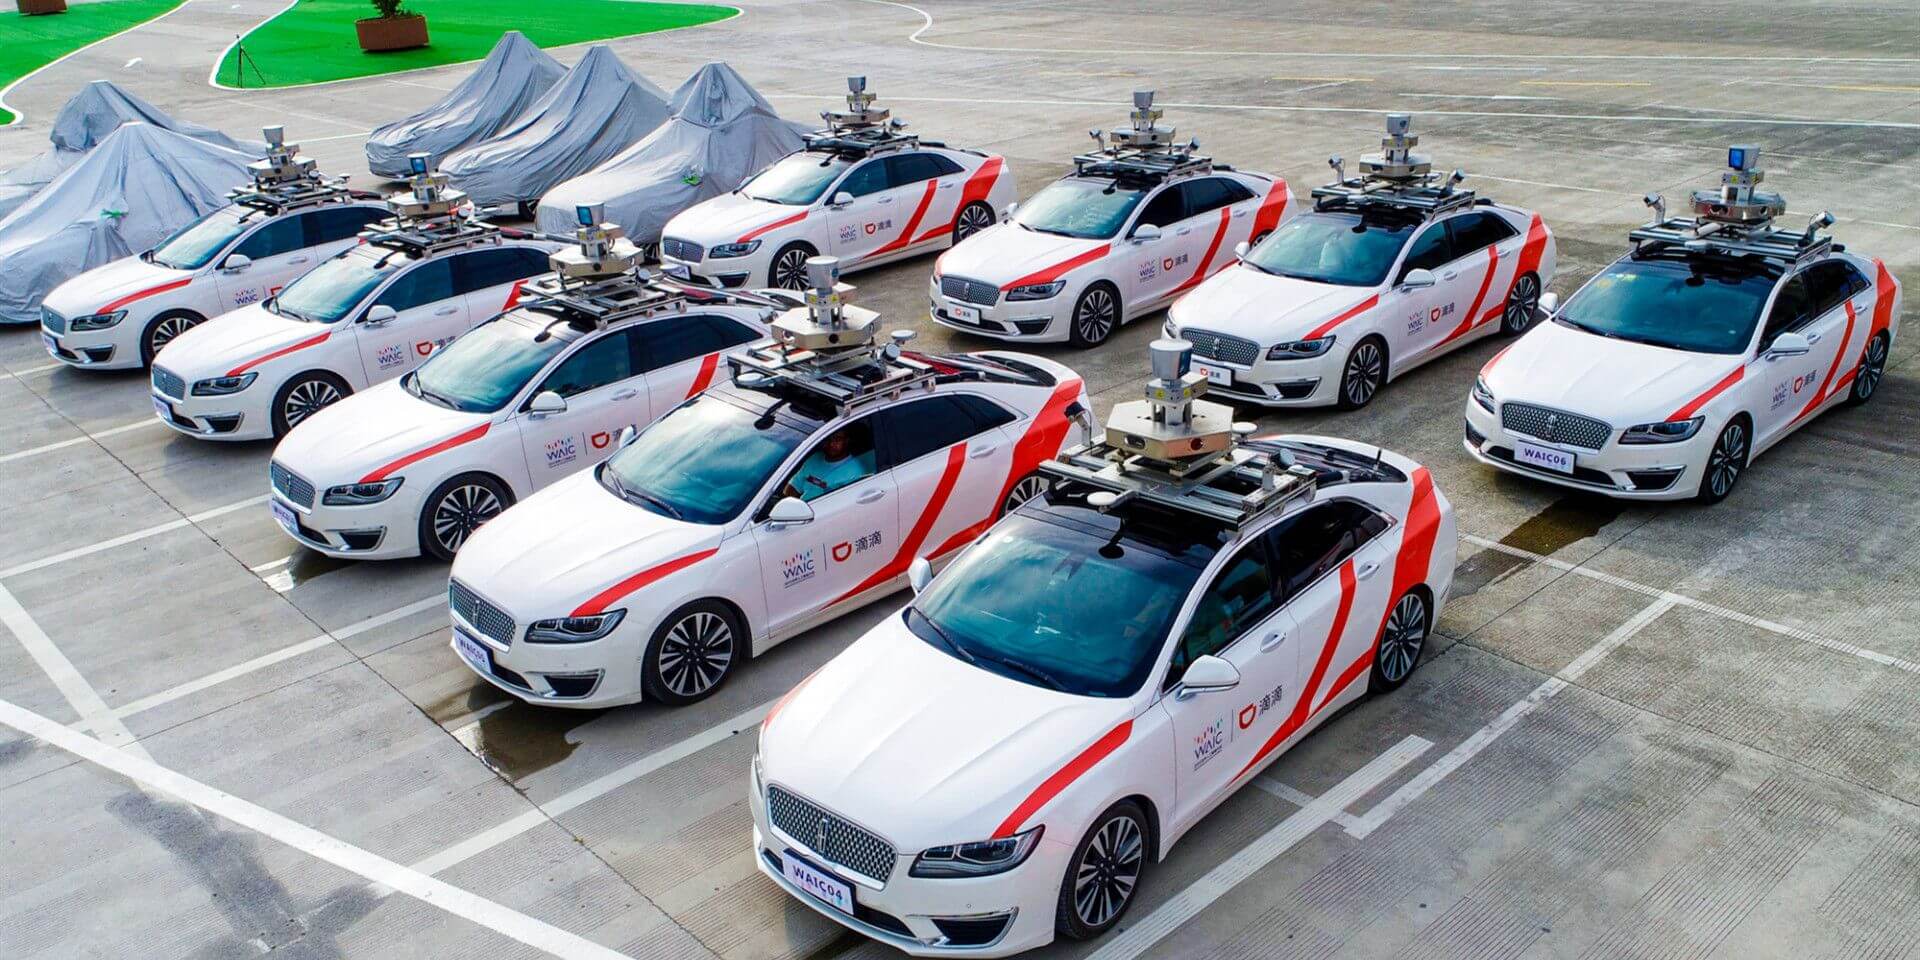 Didi Chuxing is looking to launch self-driving rides in Shanghai and expand them beyond China by 2021